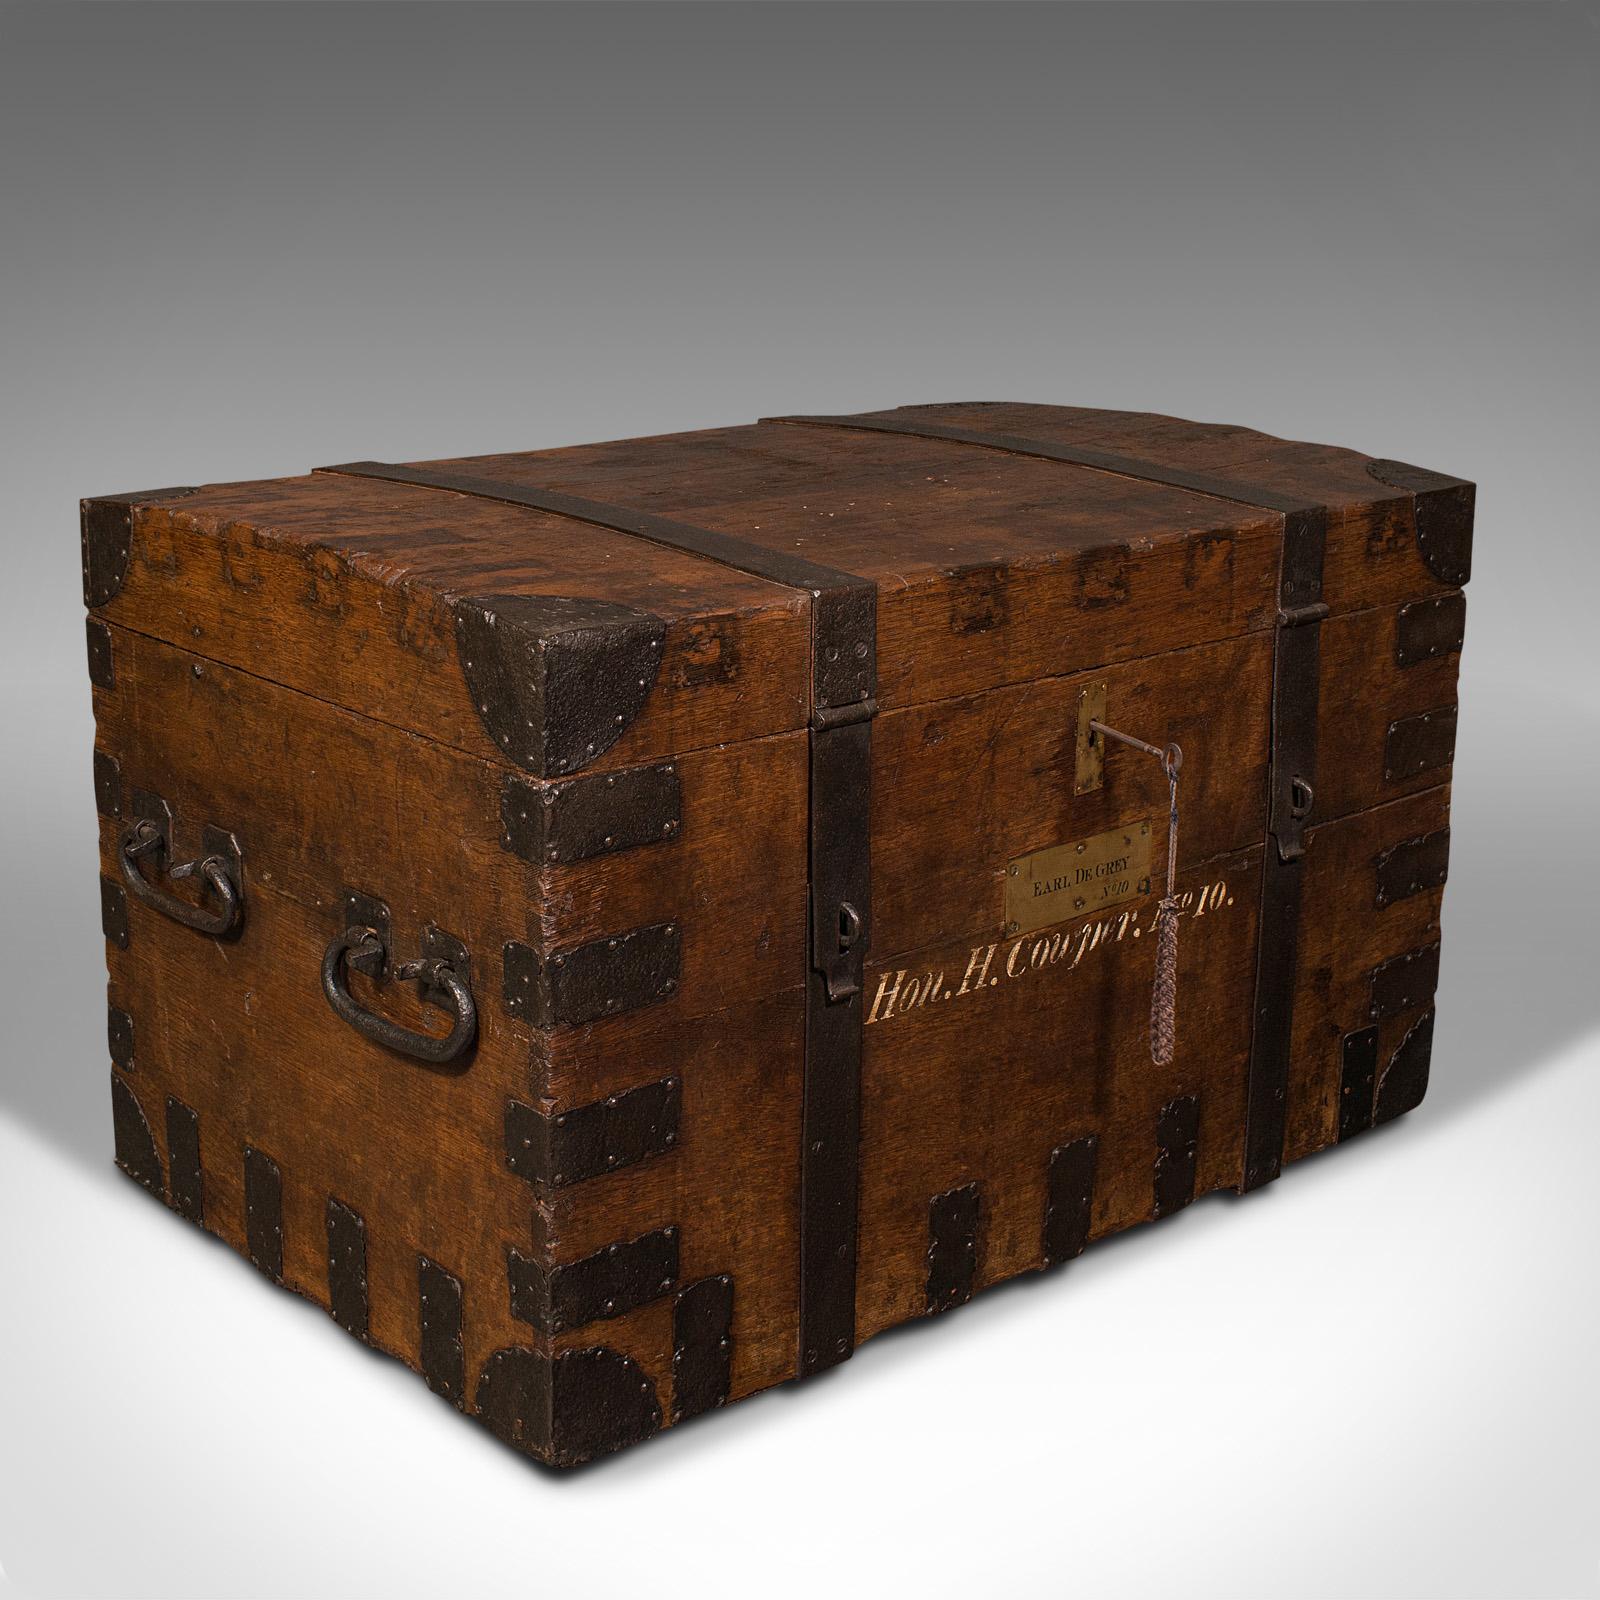 This is a large antique silver chest. An English, oak and cast iron bound campaign trunk, dating to the mid Victorian period, circa 1850.

Thomas de Grey, the second Earl de Grey (1781 - 1859) was a Tory politician in 19th century Britain. His